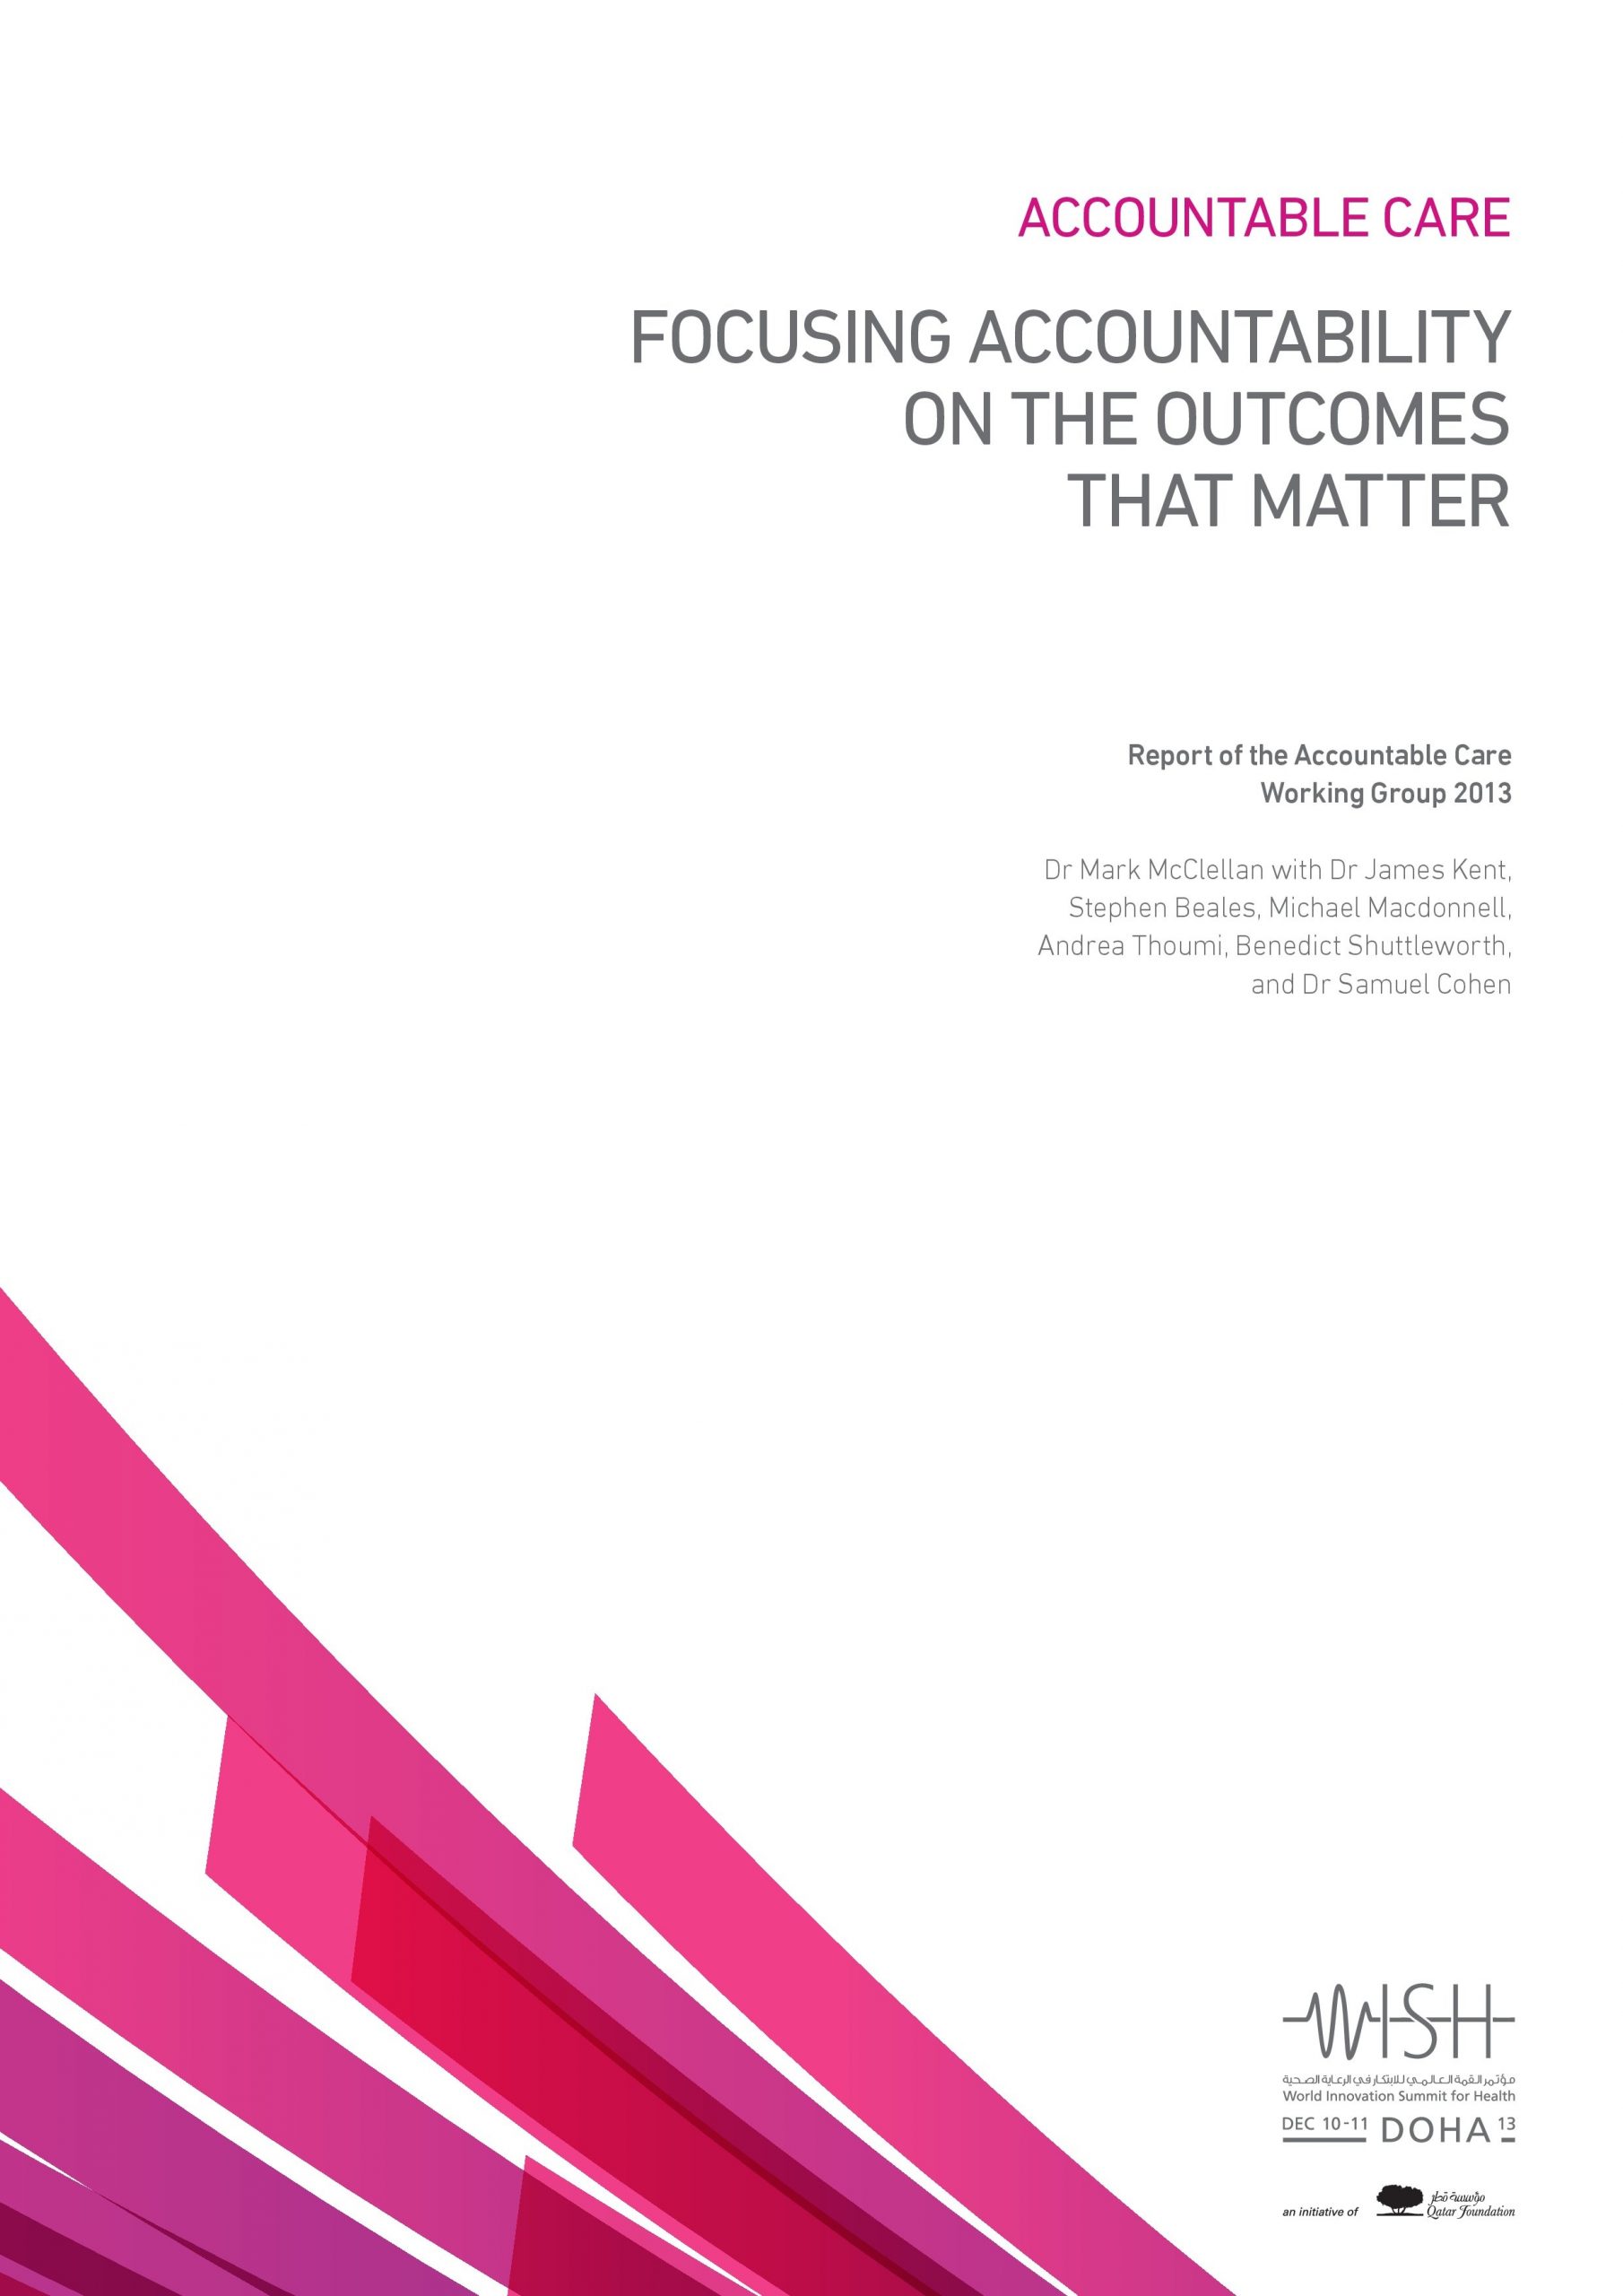 Focusing Accountability on the Outcomes that Matter